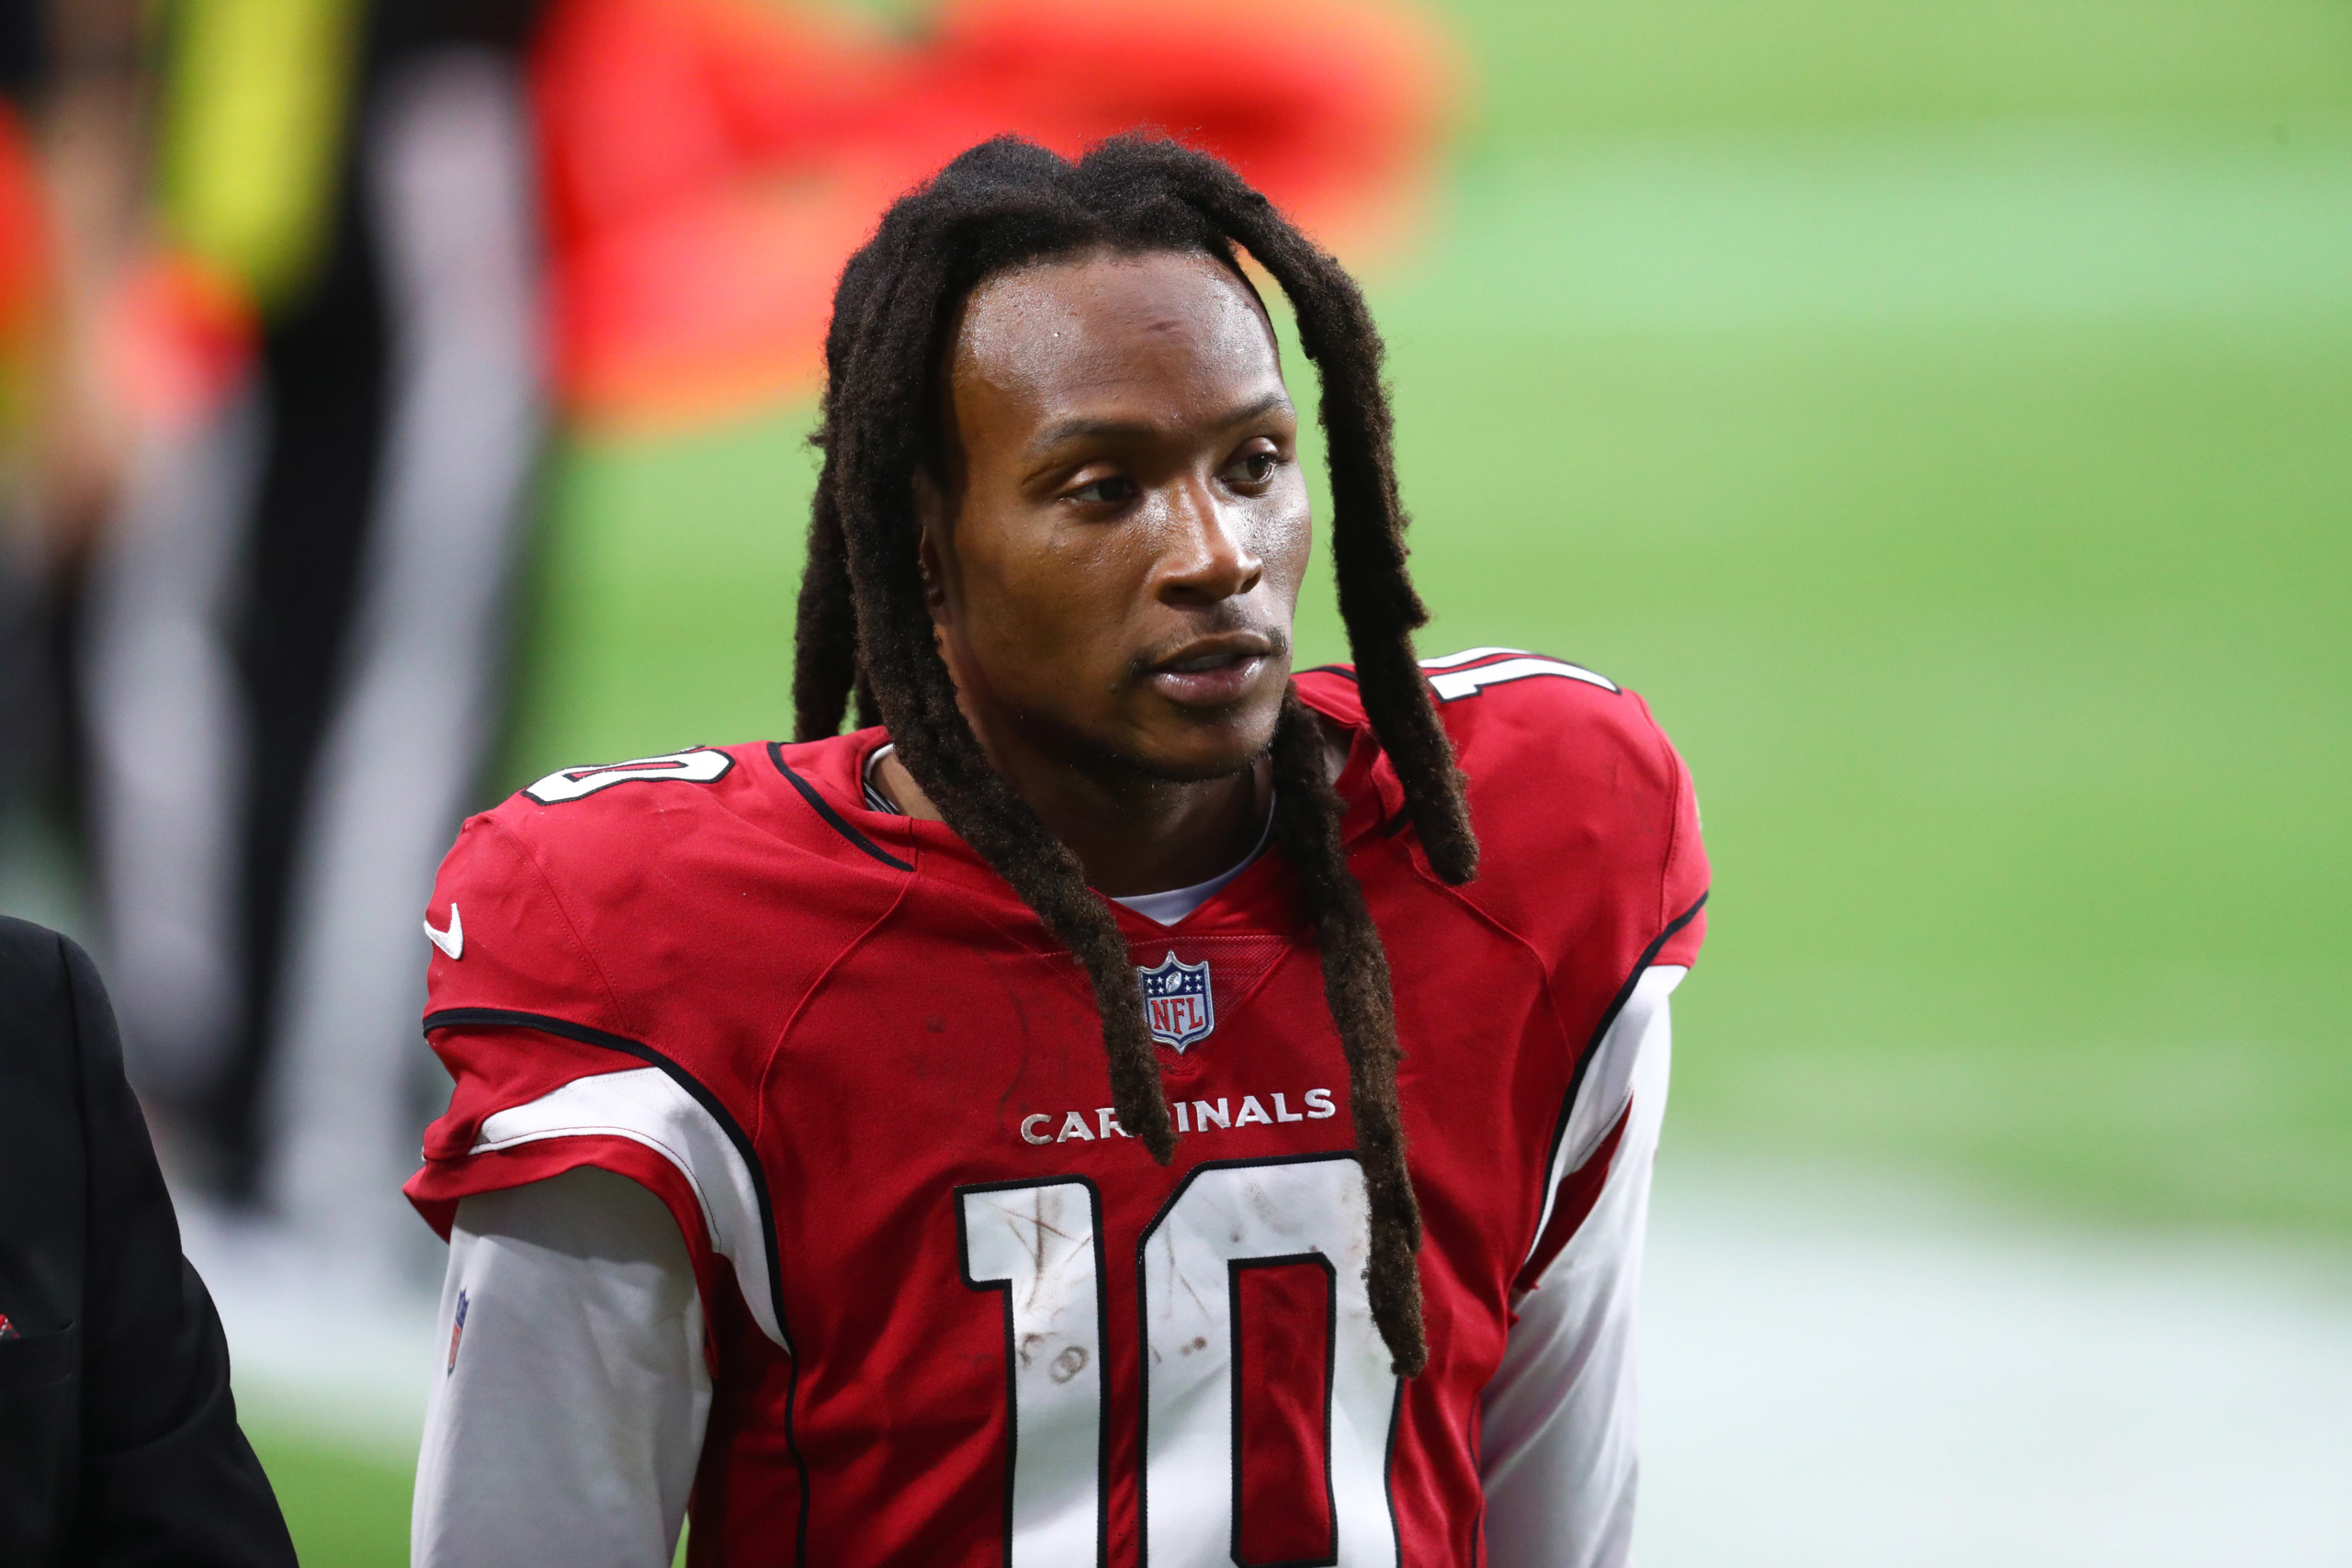 DeAndre Hopkins Furthers Investment Portfolio with BioSteel Deal